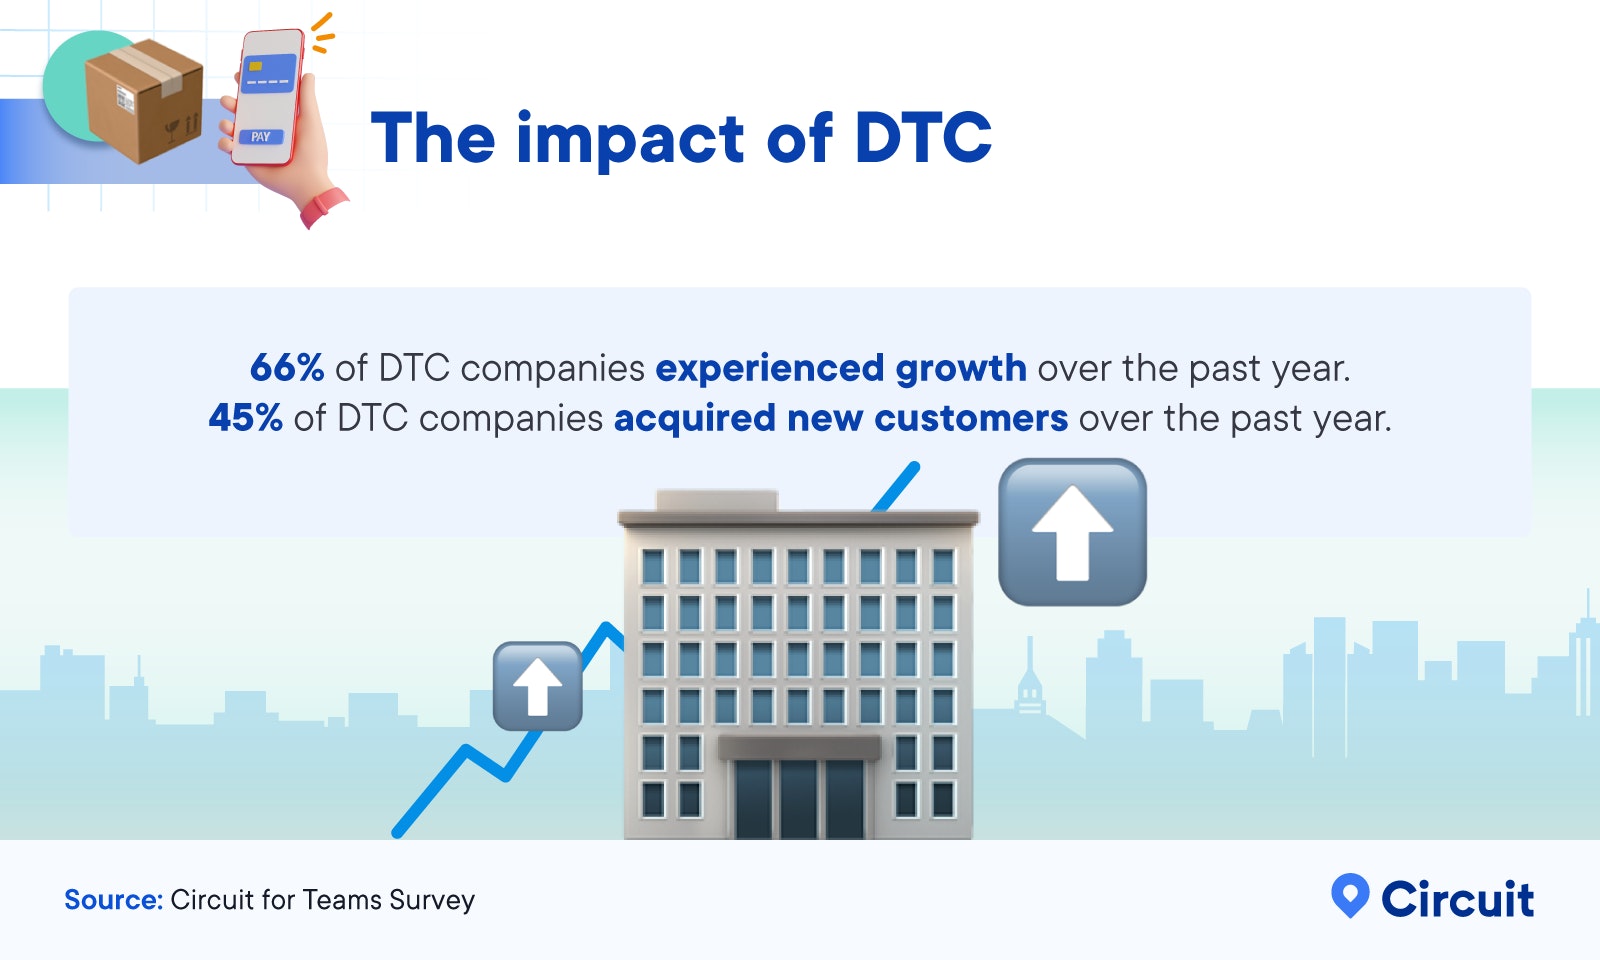 Percentages expressing positive impacts of DTC based on Circuit for Teams Survey